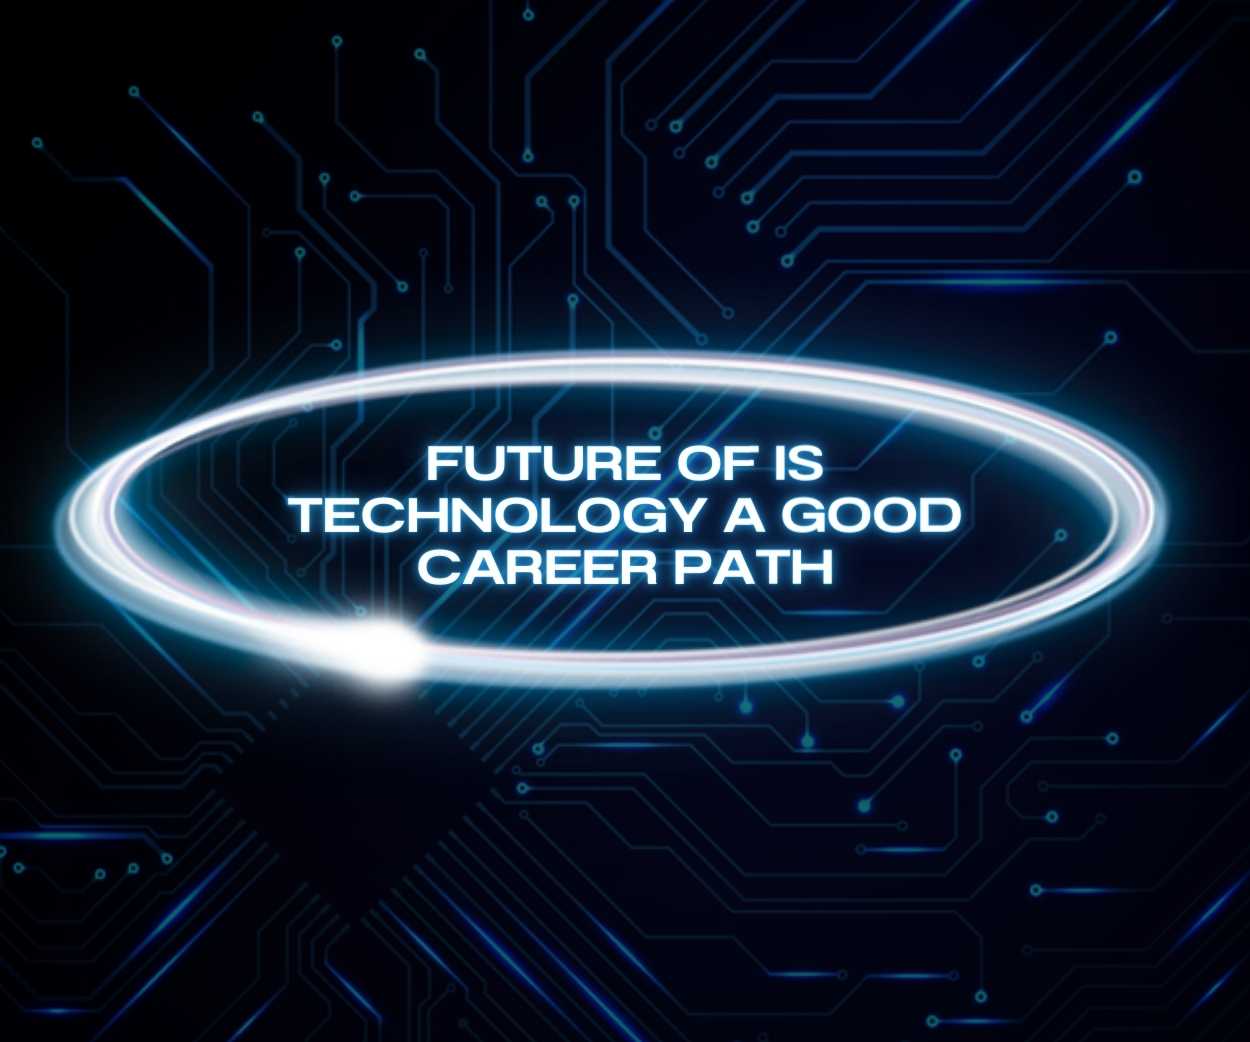 Future of is Technology a good career path